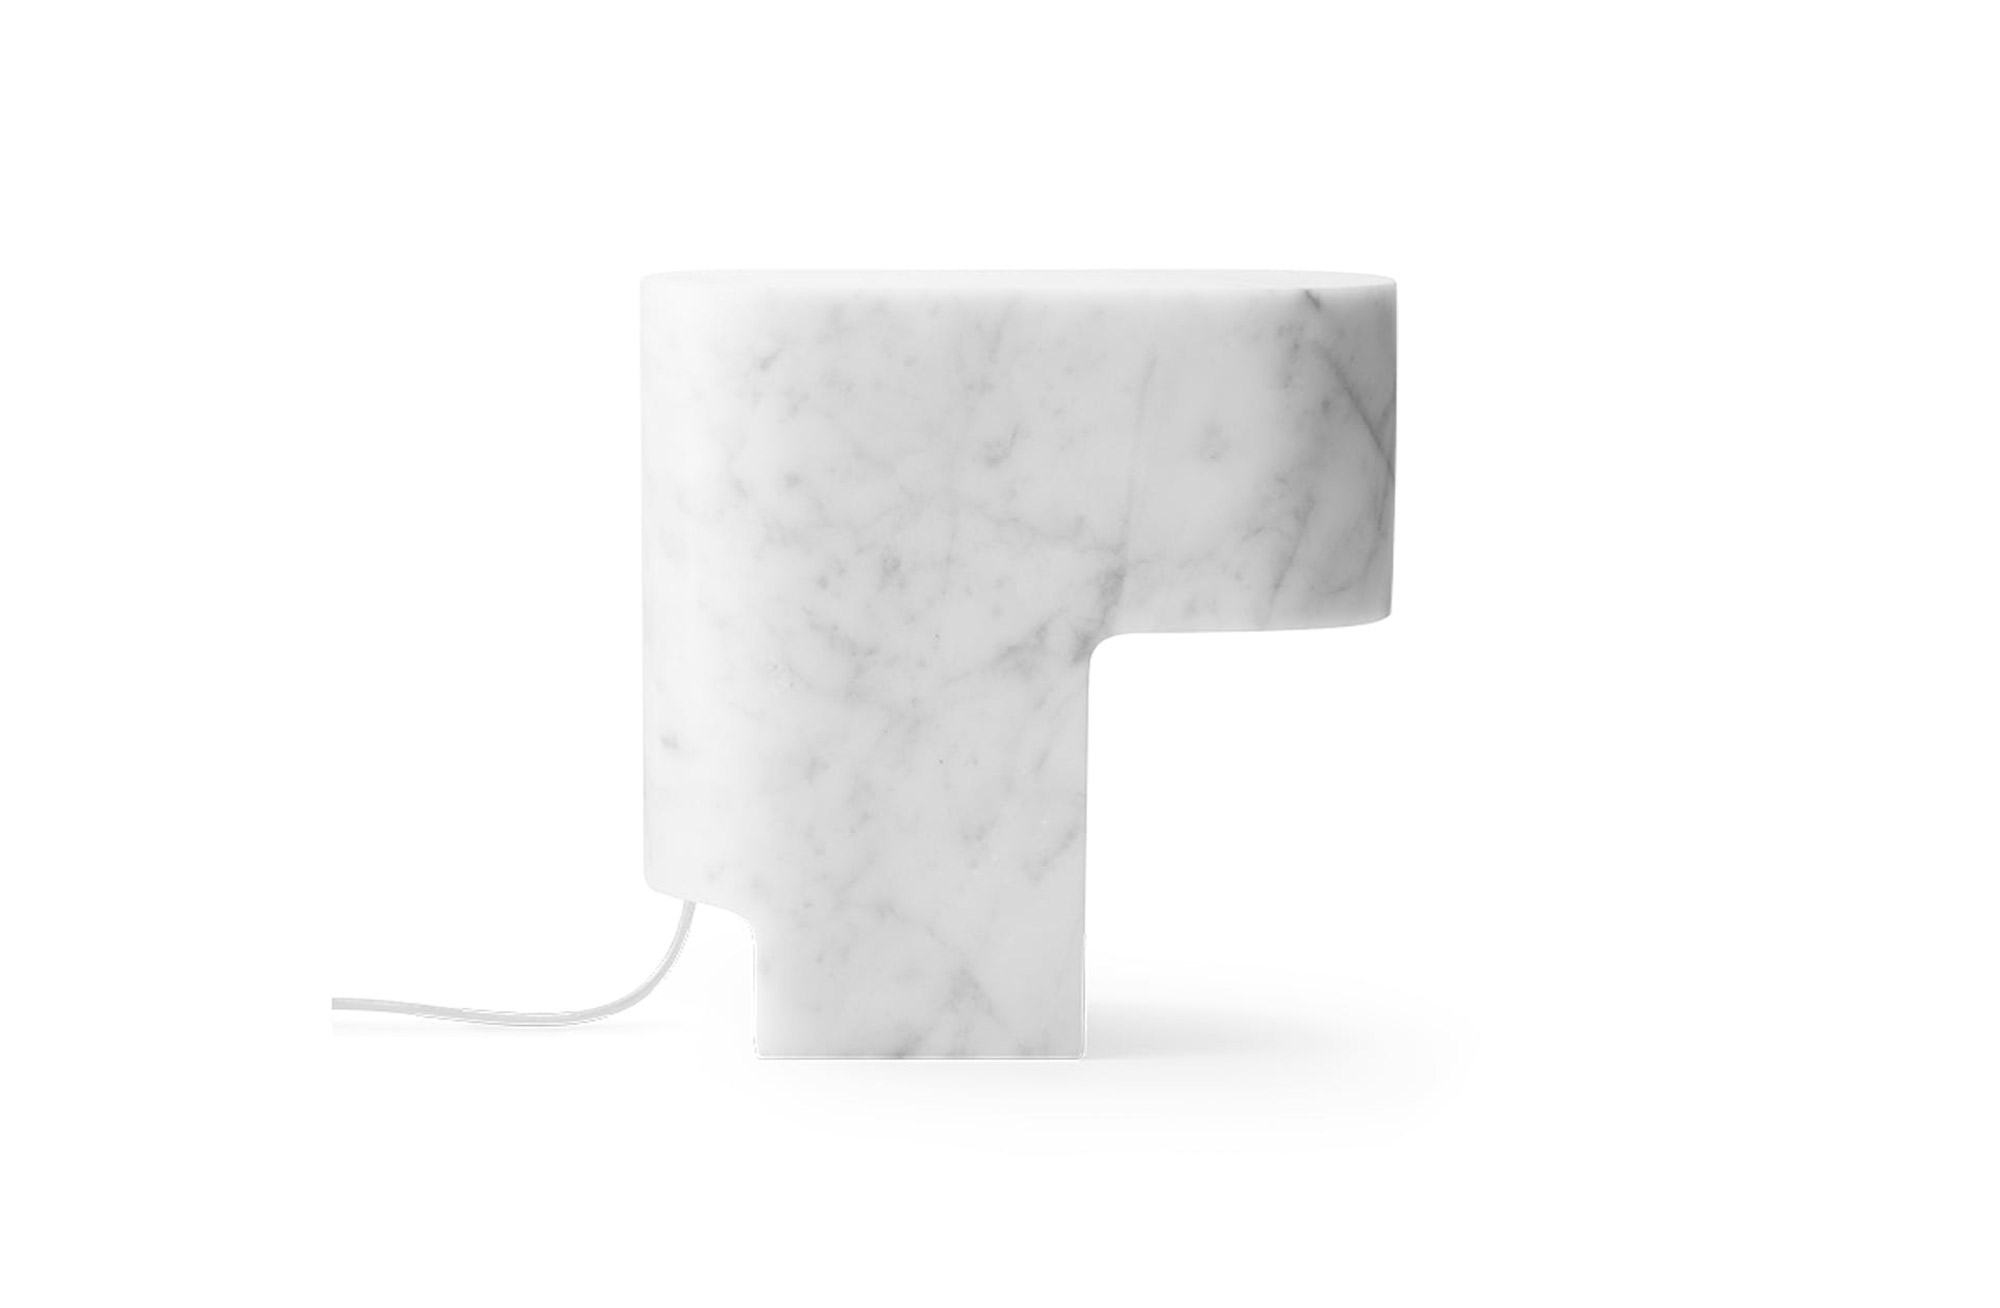 The W223 Table Lamp by John Pawson for Wästberg, marble variation